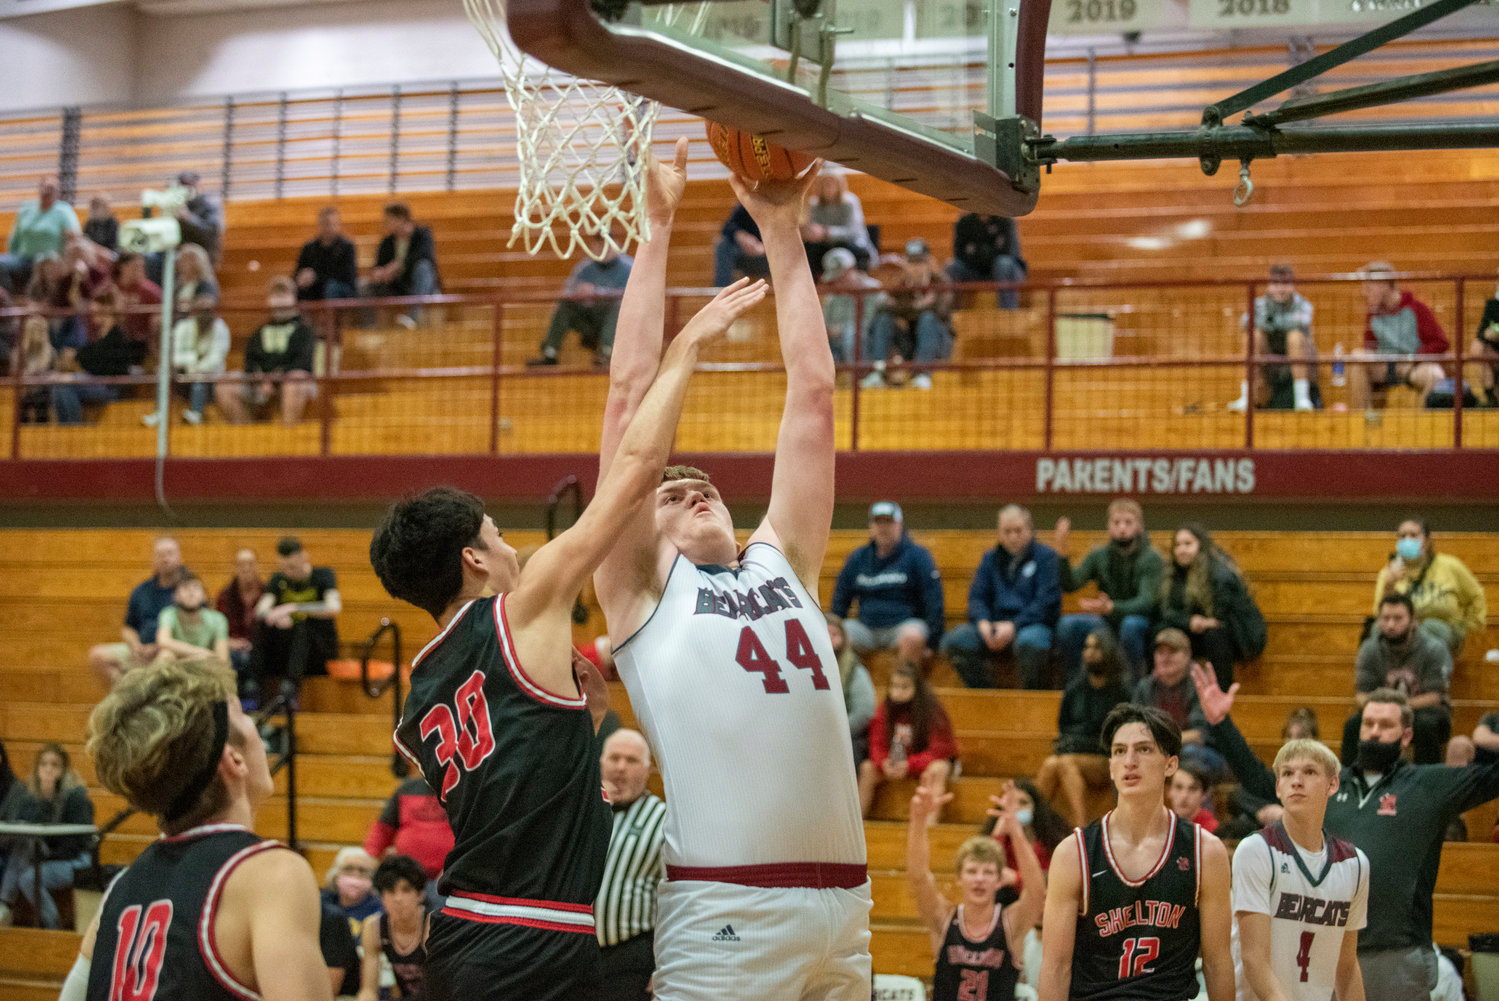 W.F. West's Soren Dalan (44) goes up for two points against Shelton's Matai Lei Sam (30) on Dec. 8.